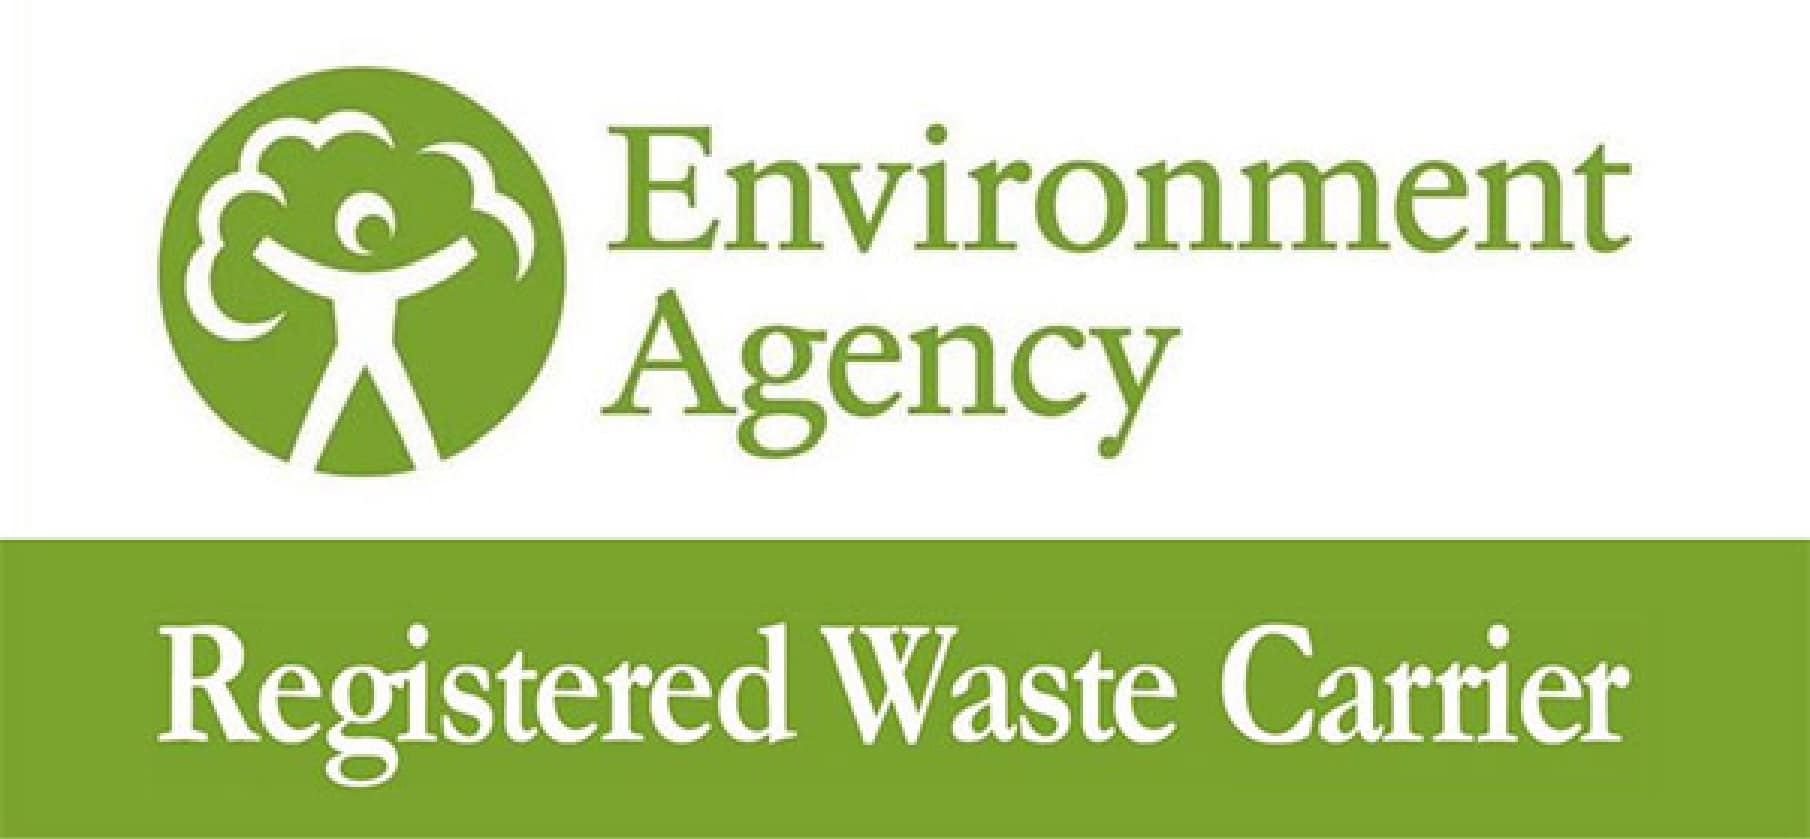 registered waste carrier licence from the environment agency